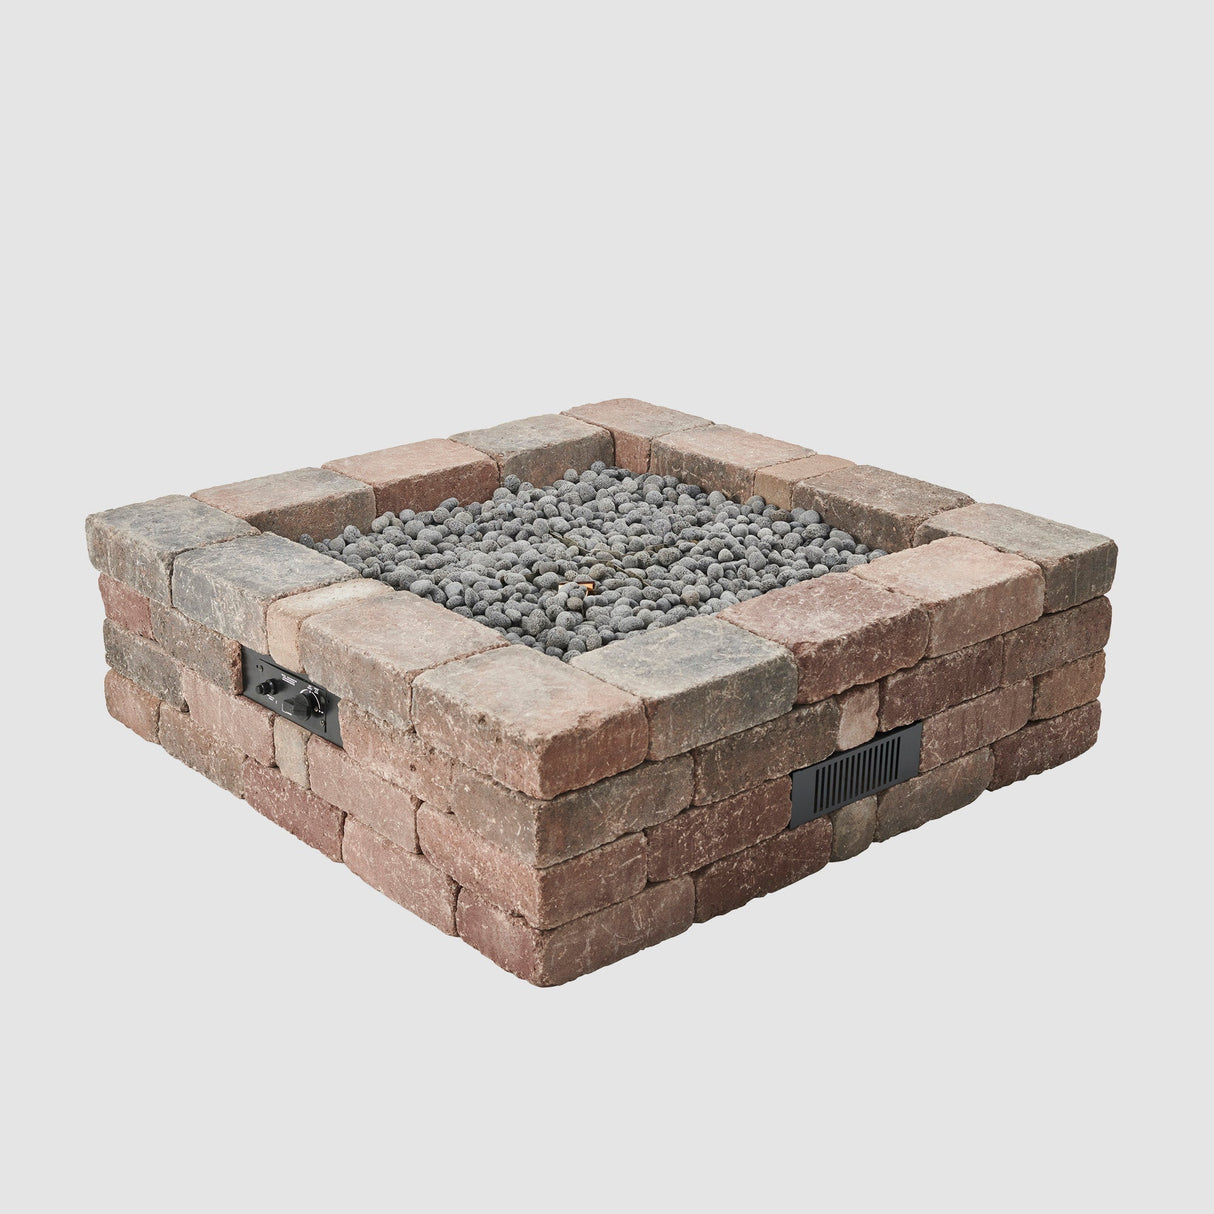 Bronson Block Square Gas Fire Pit Kit with lava rocks on the burner